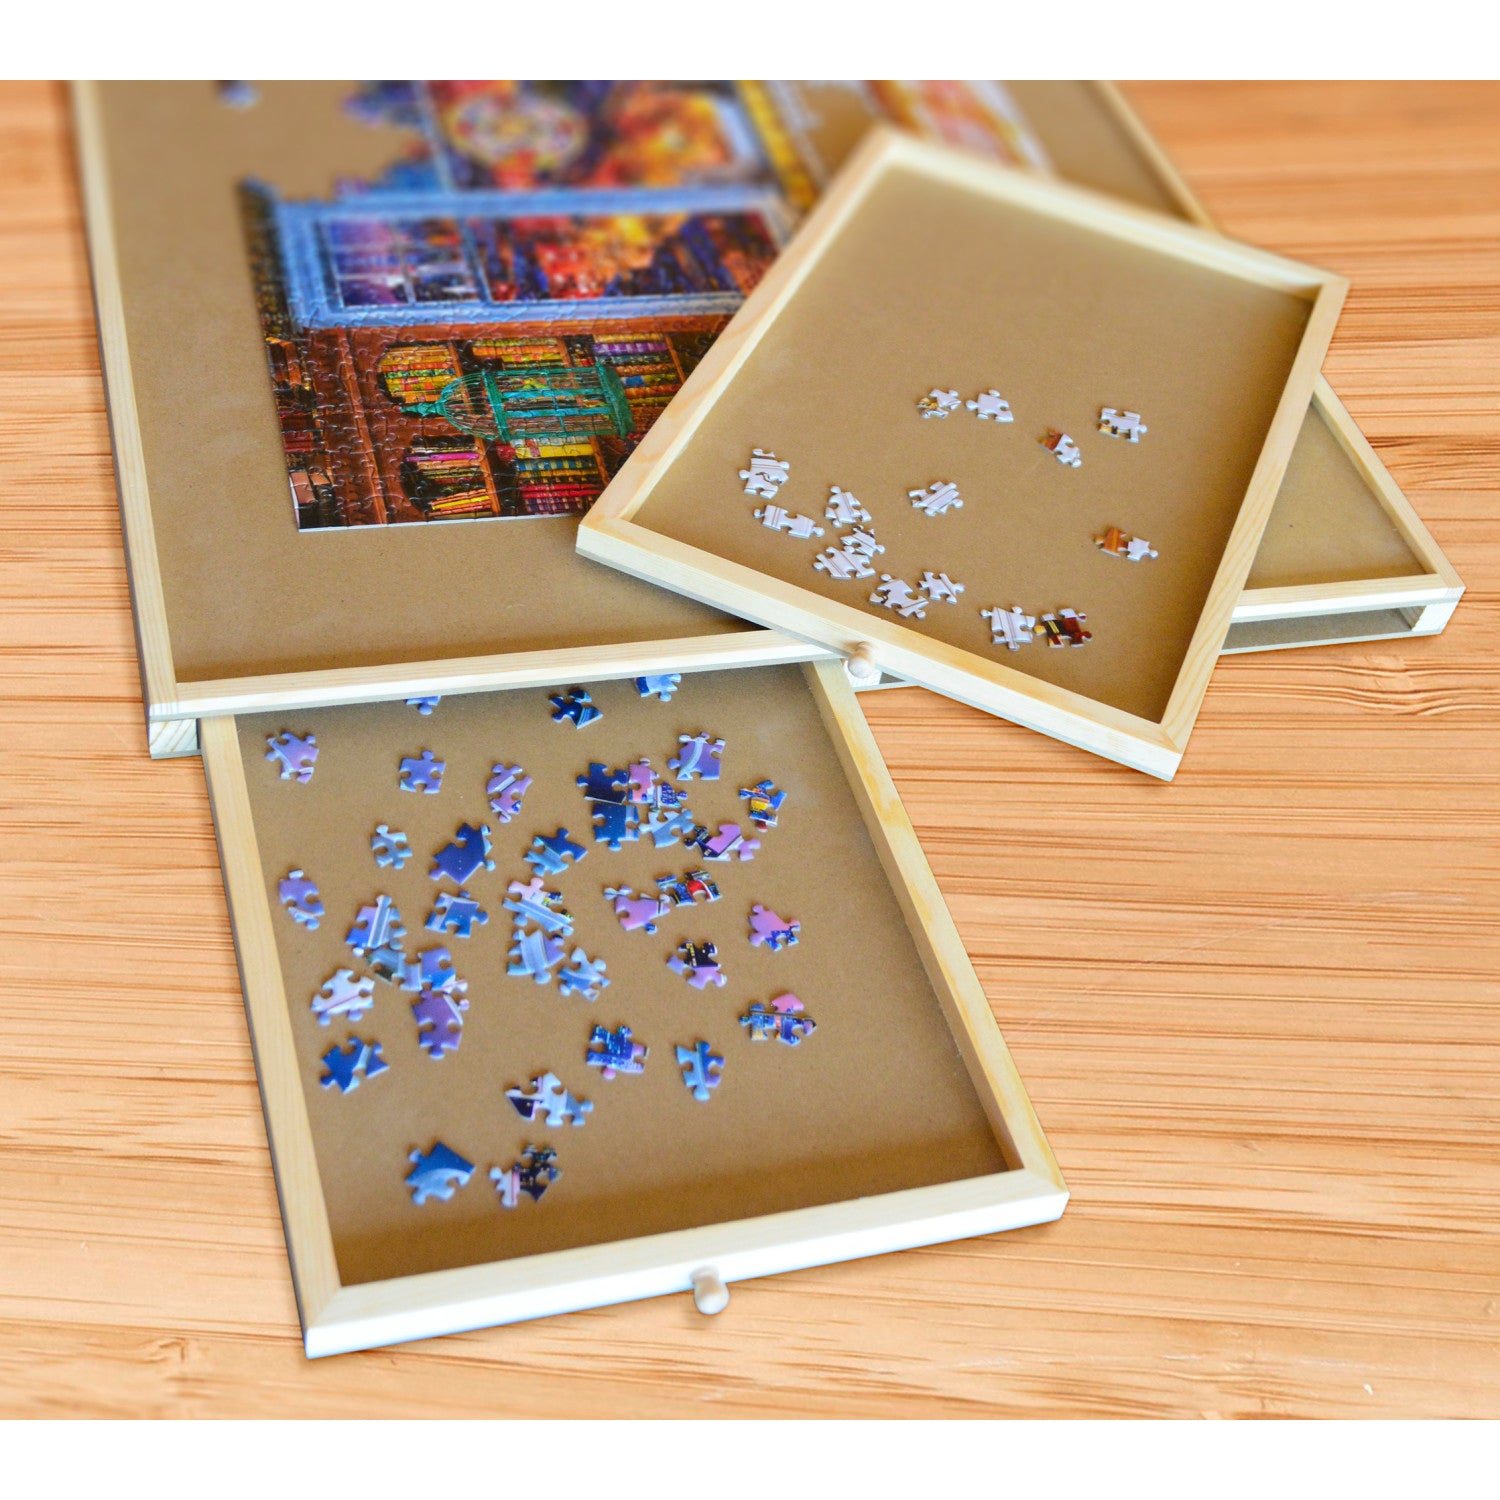 Jumbl 1500 Piece Puzzle Board, 27” x 35” Jigsaw Puzzle Table